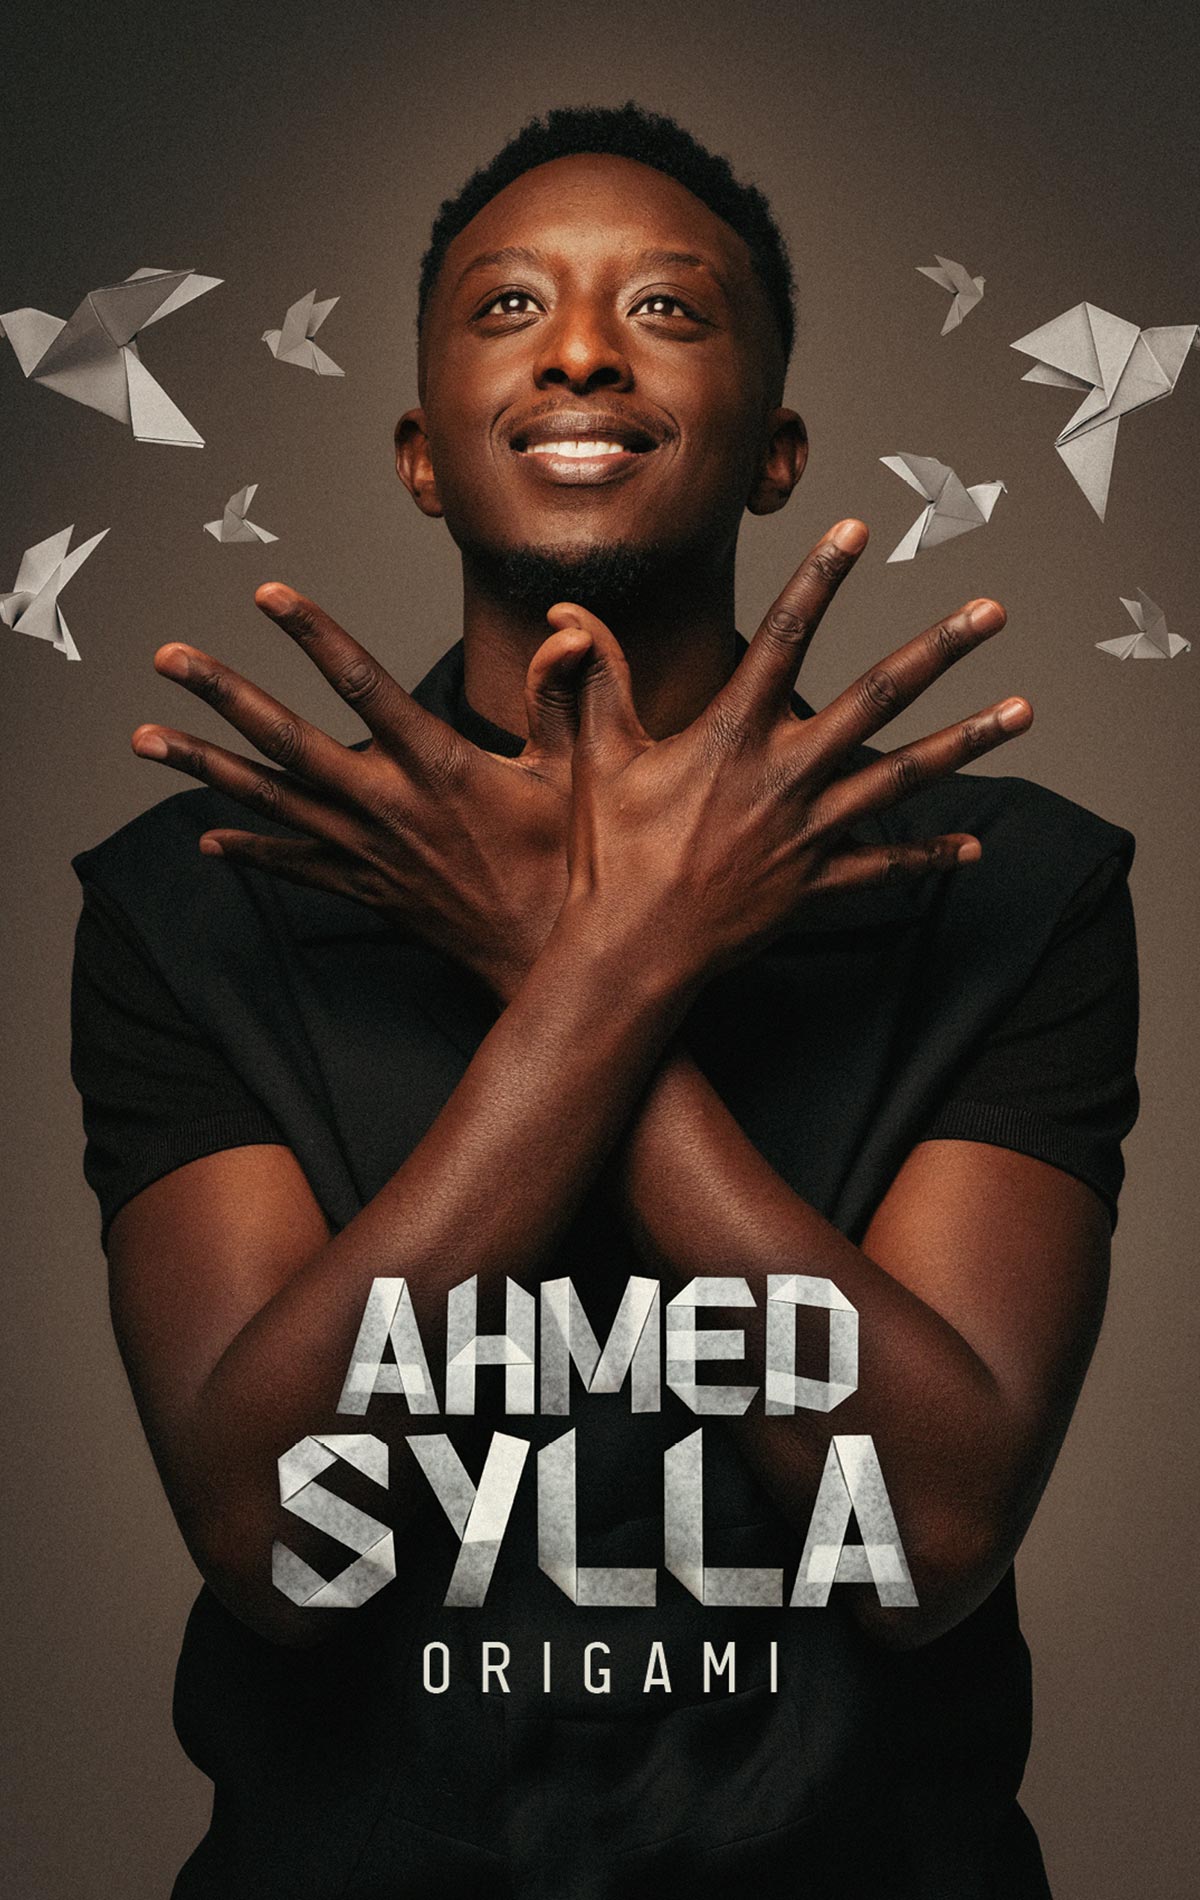 Ahmed Sylla at Brest Arena Tickets